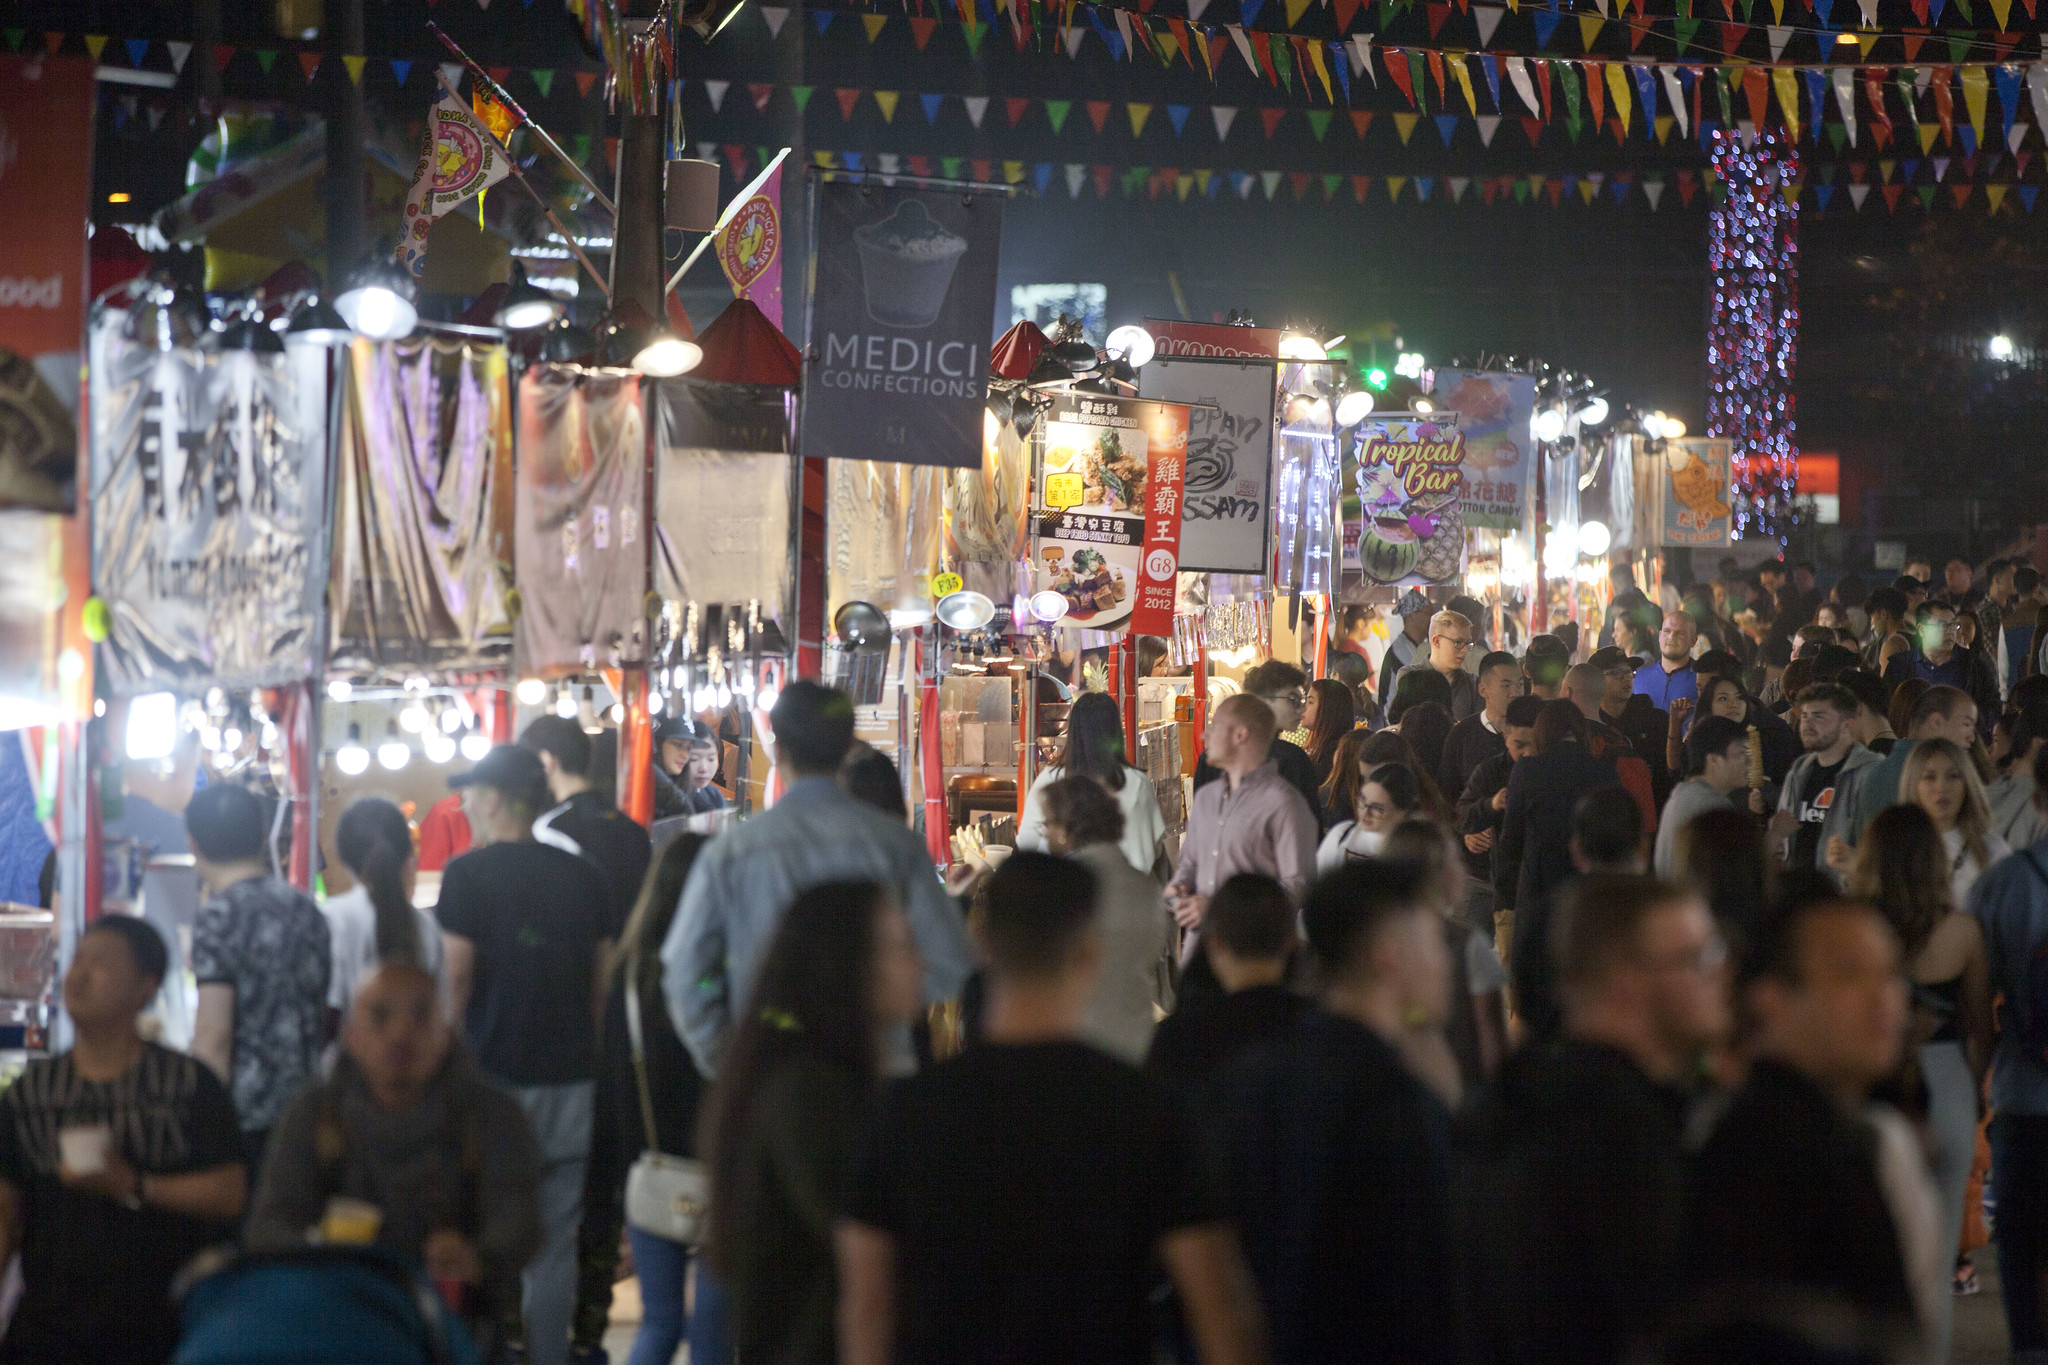 Crowds people walk by the food vendors at the Richmond Night Market in 2019